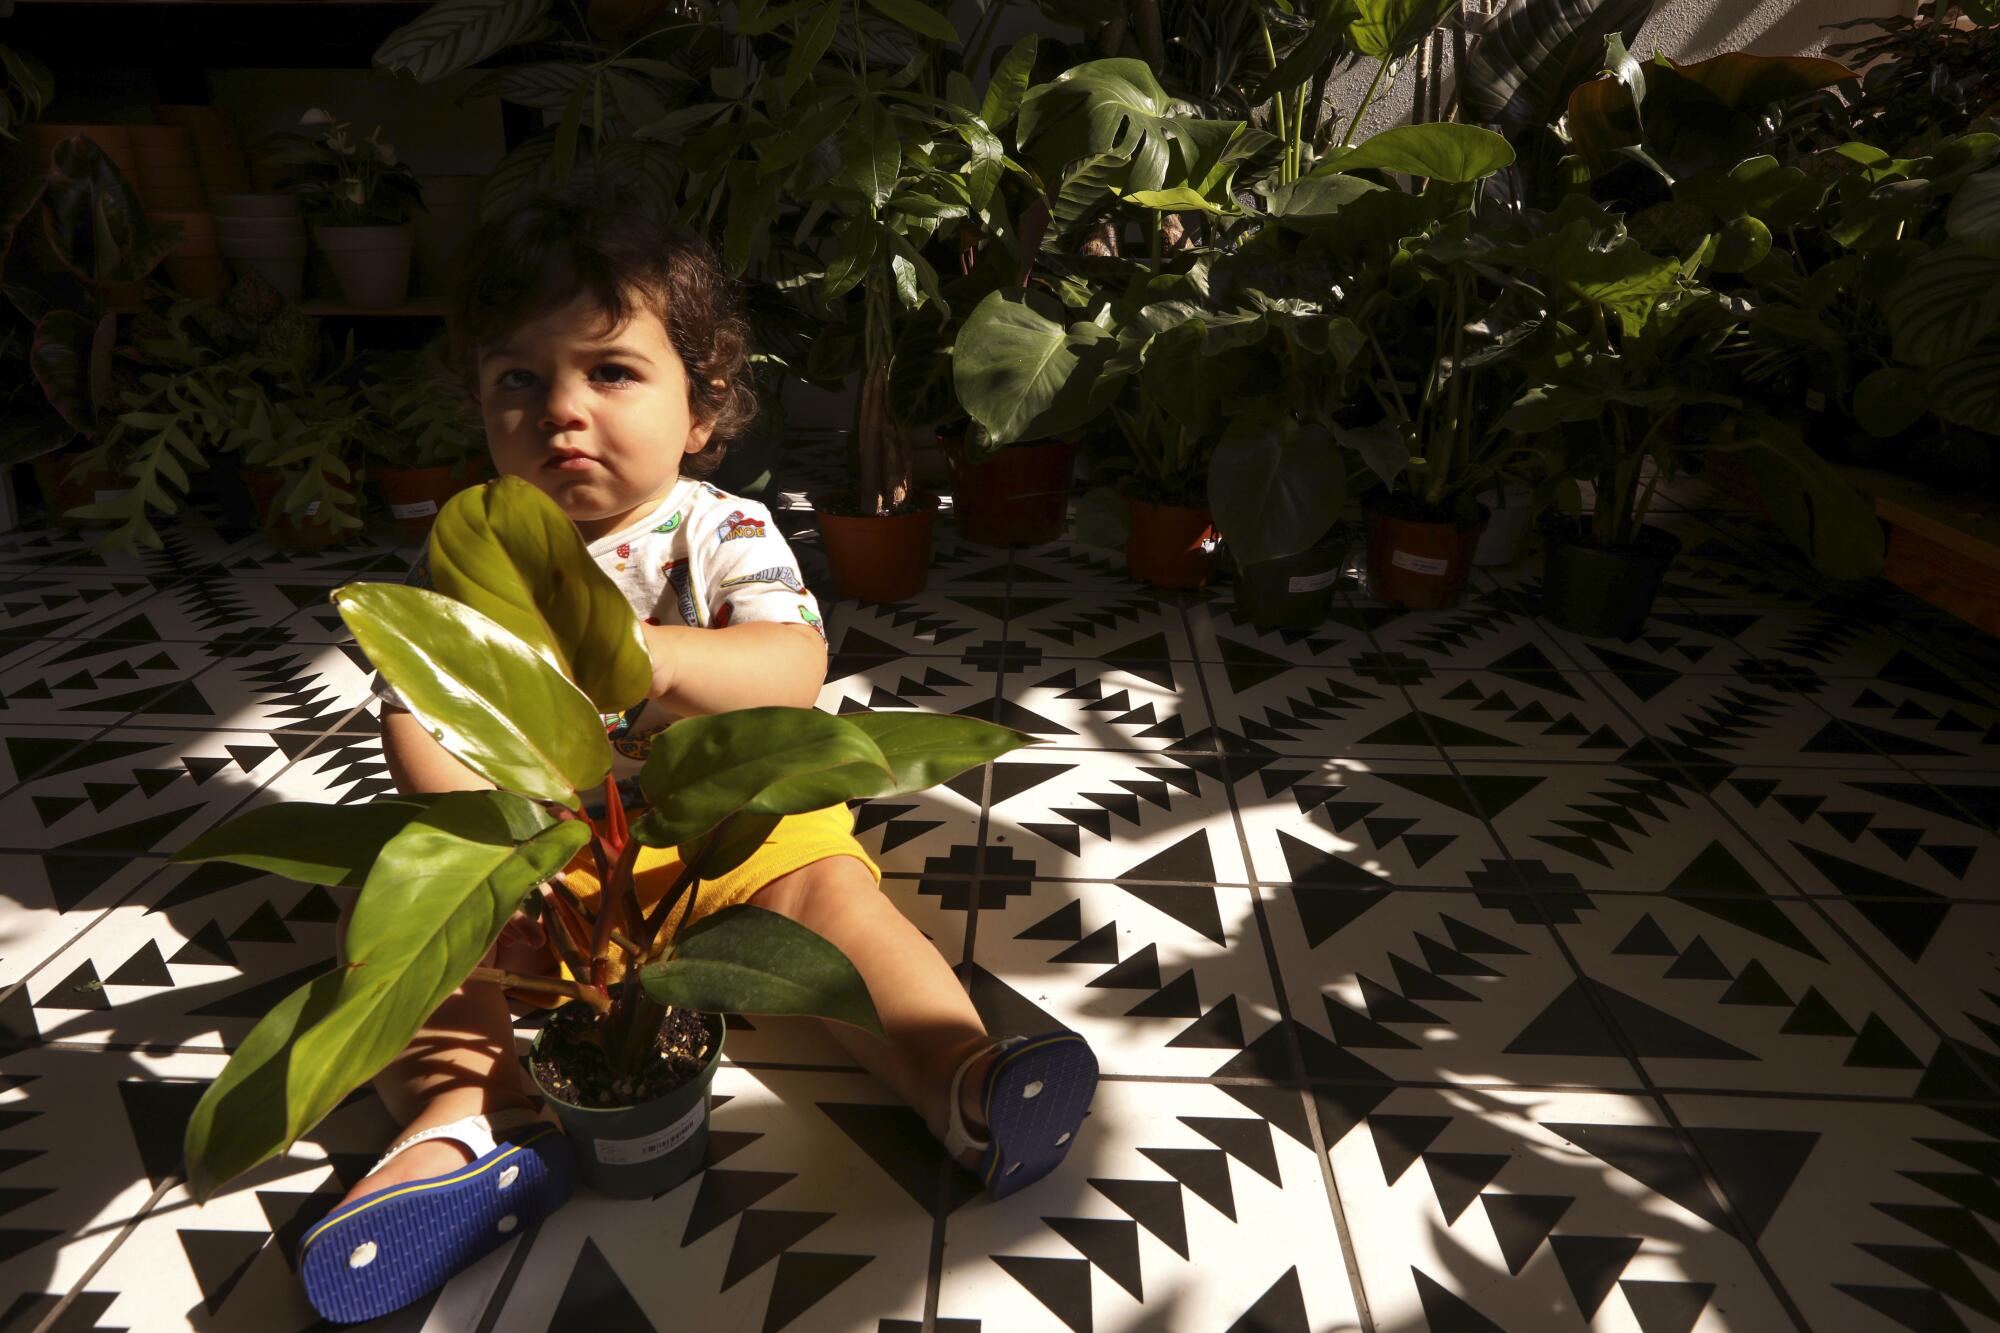 One-year-old Kylo Bazik sits on the floor of his parents' shop with a plant.